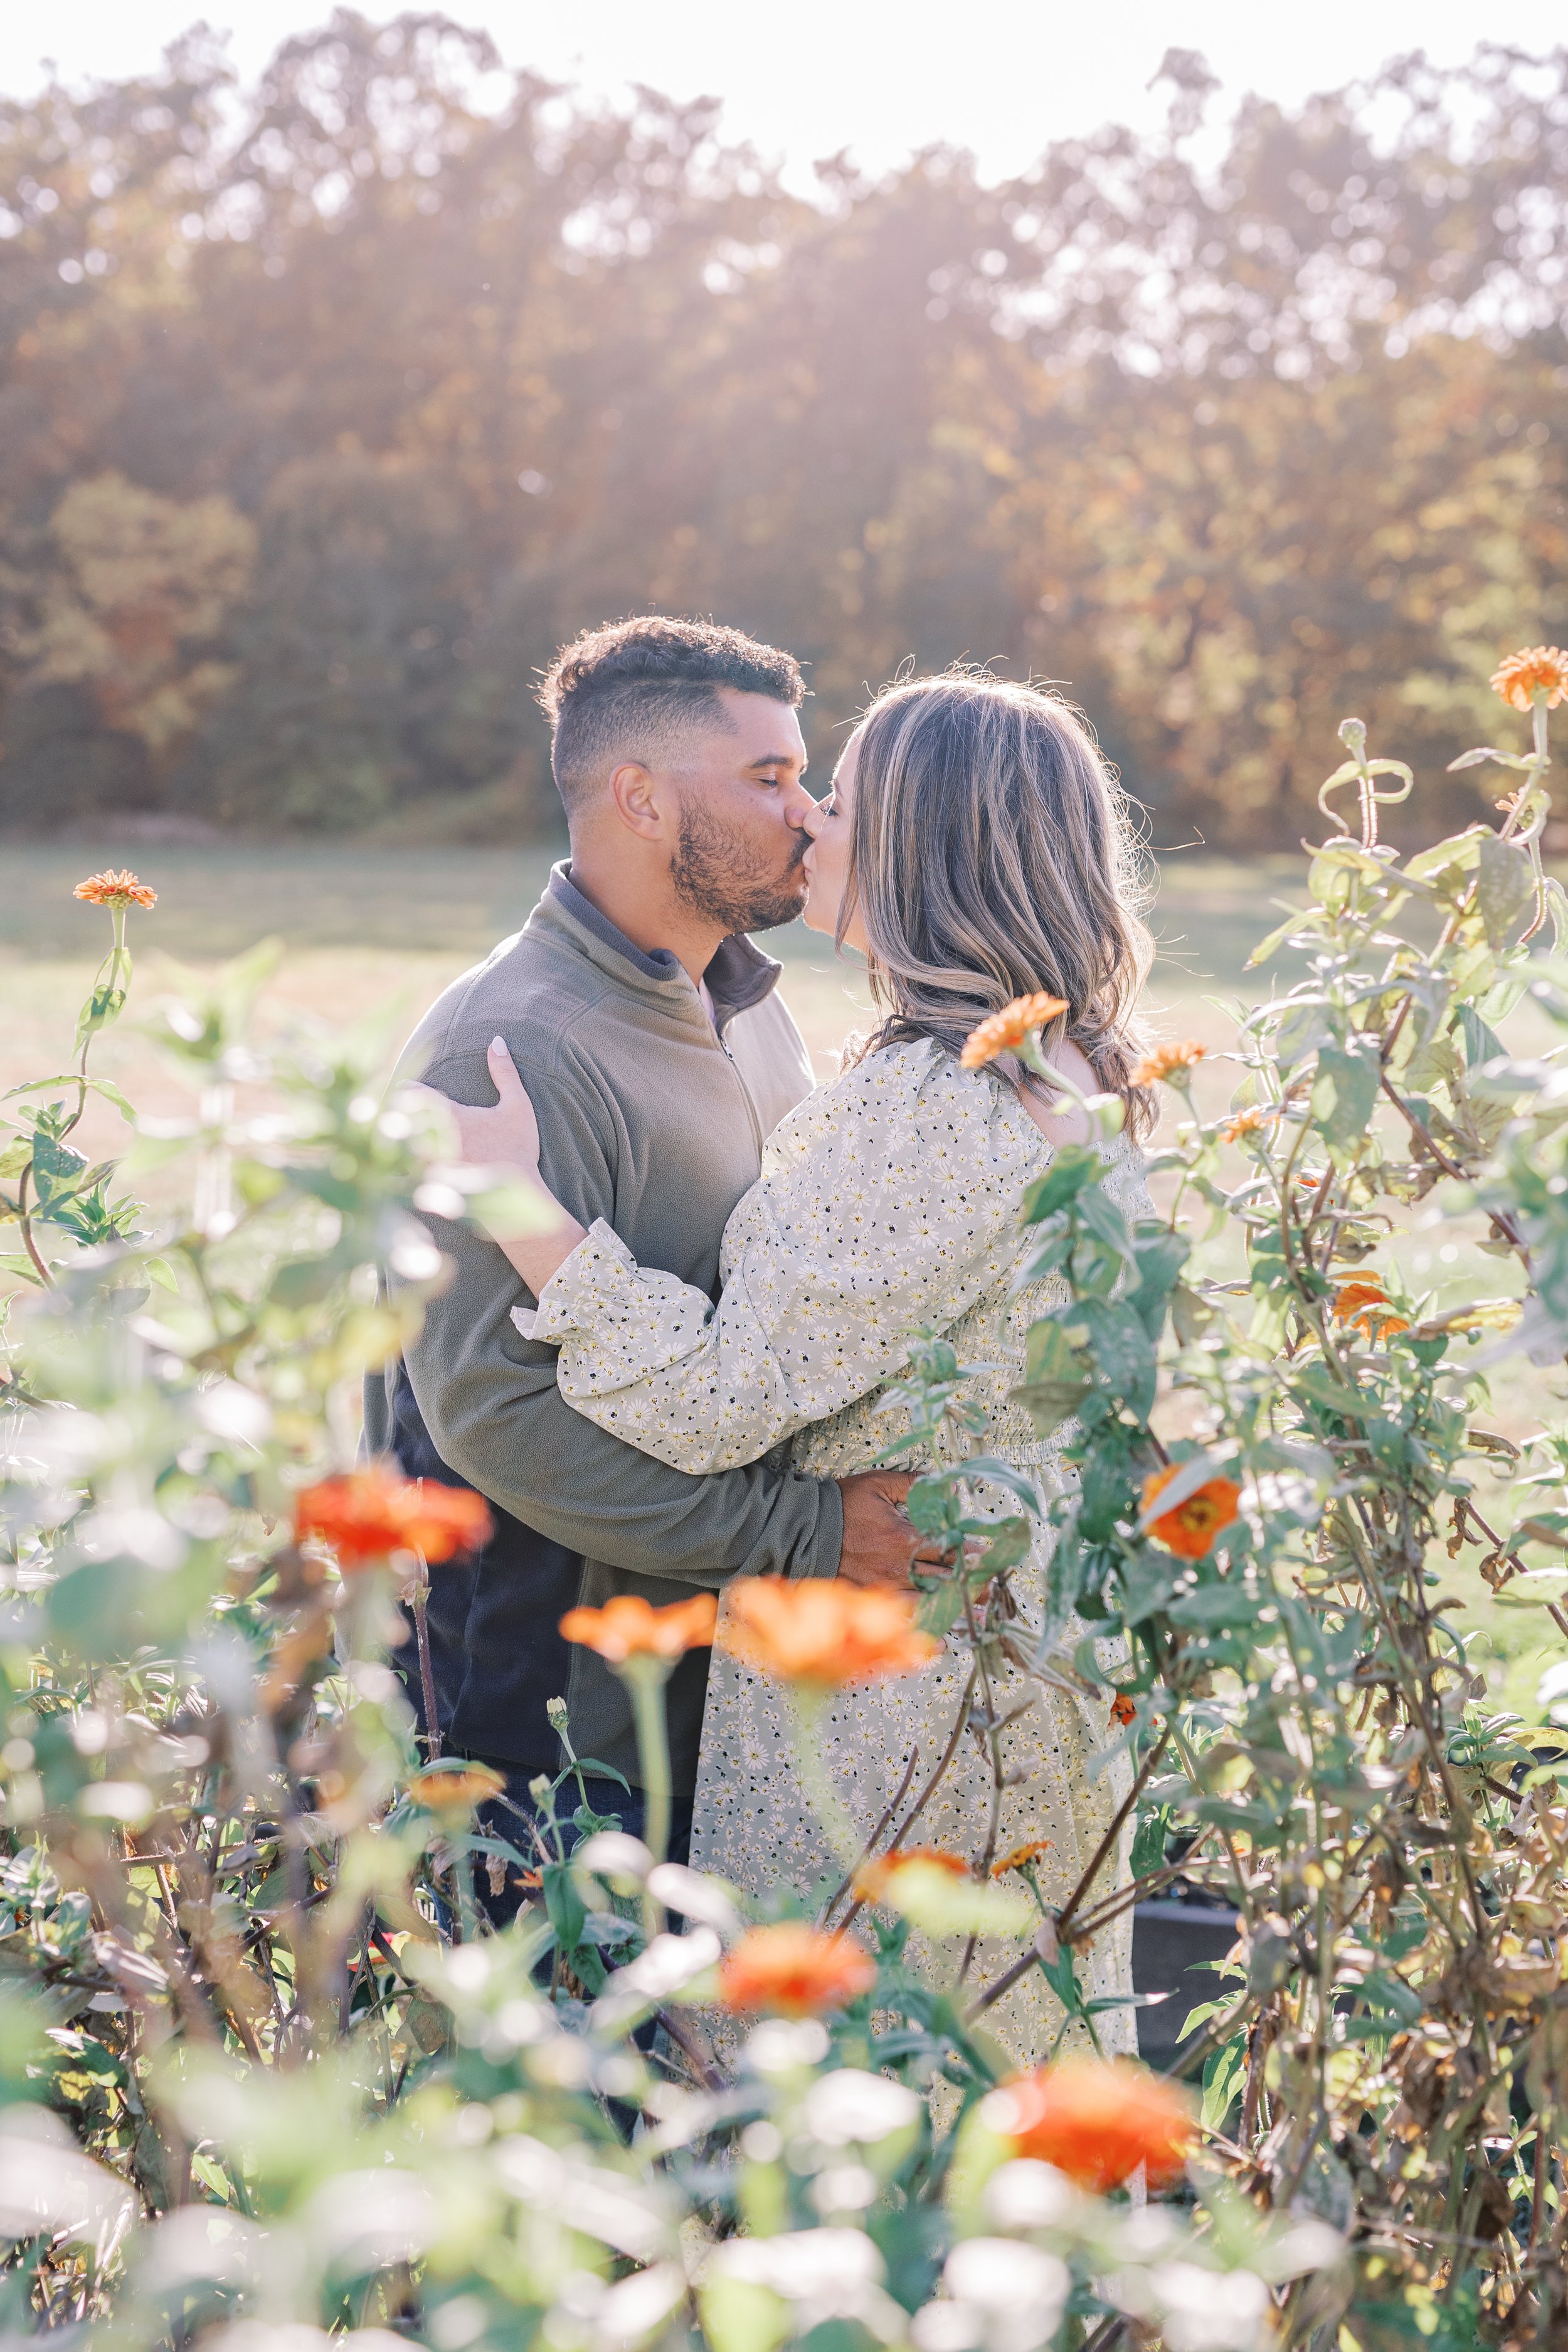 Ashley and Devin's Engagement Shoot at The Farm Bakery